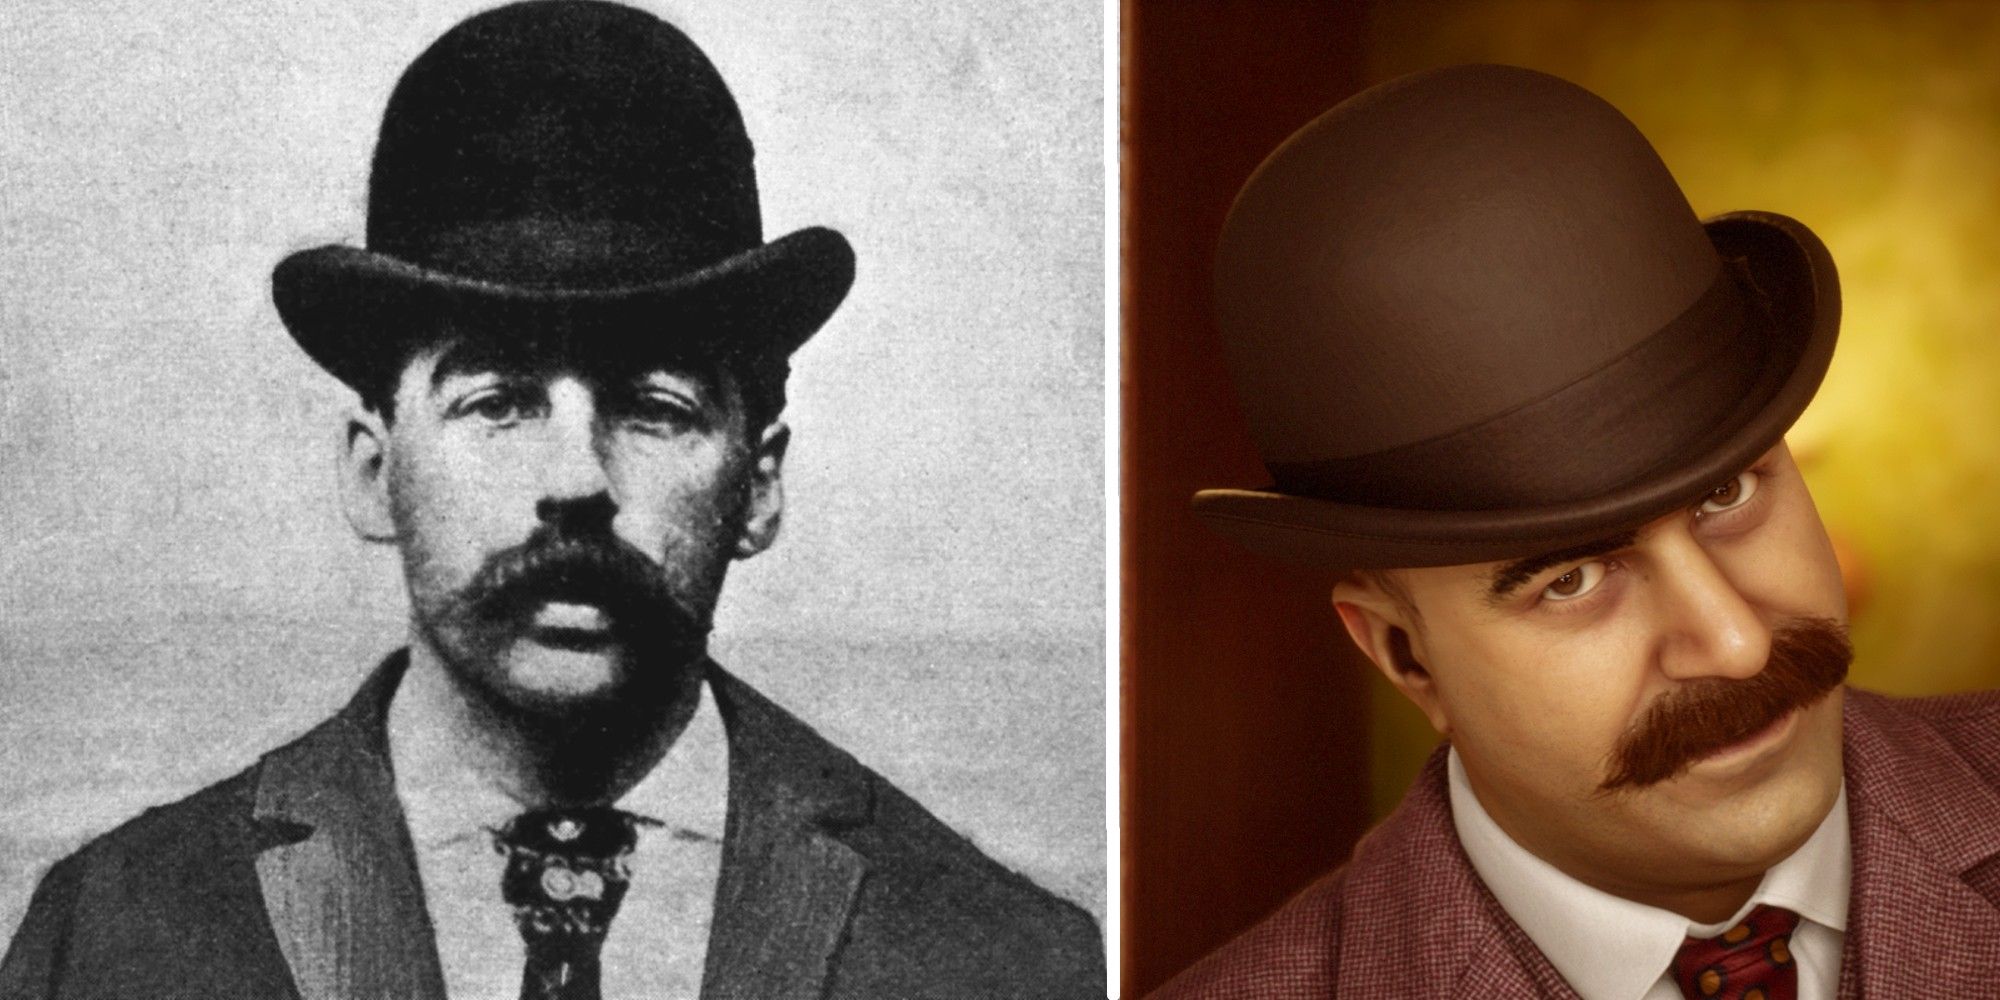 On the right, a photograph of serial killer H.H. Holmes, and on the left his depiction in The Devil In Me